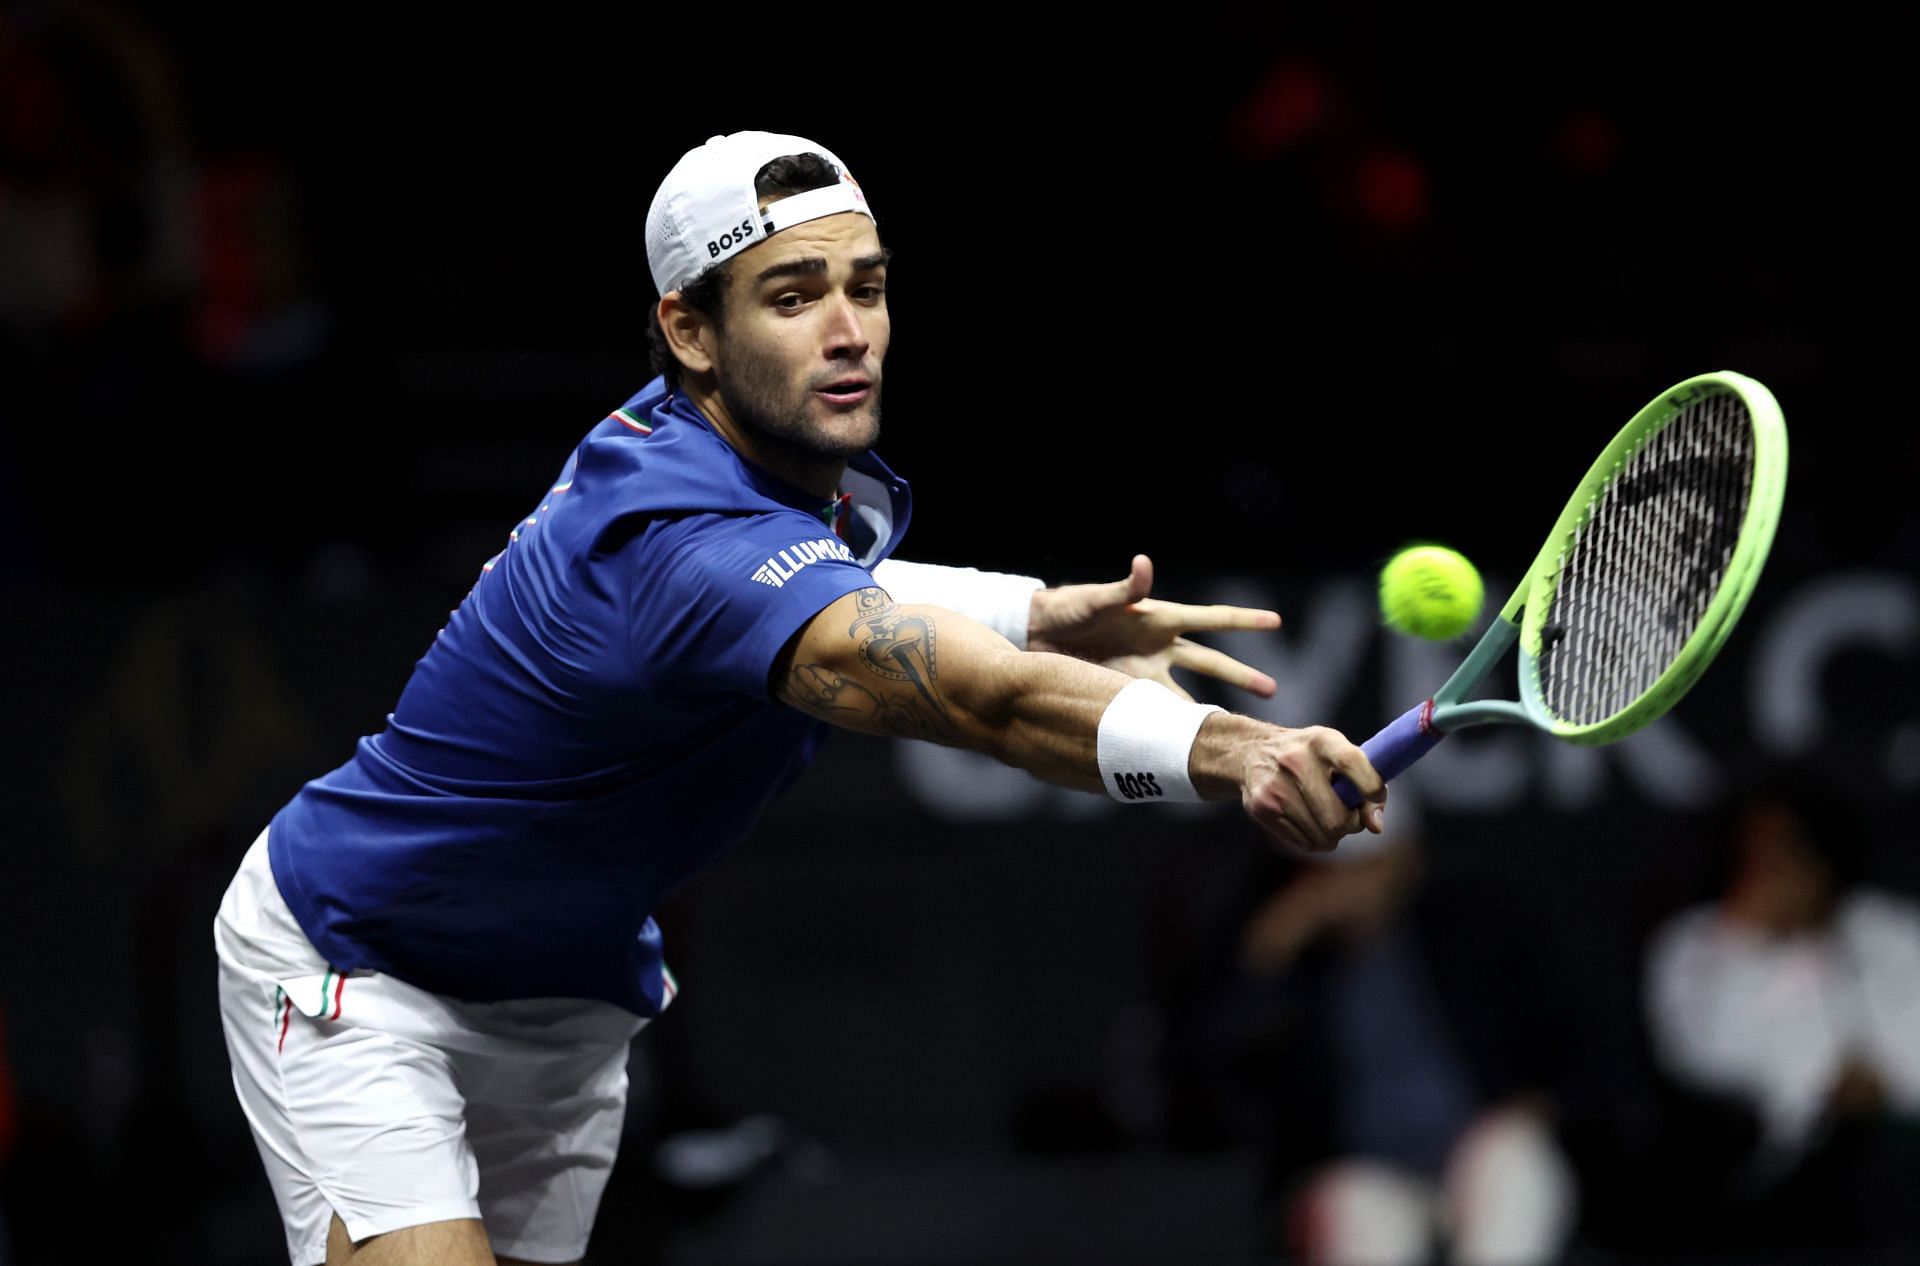 Matteo Berrettini was last seen in action at the 2022 Napoli Cup